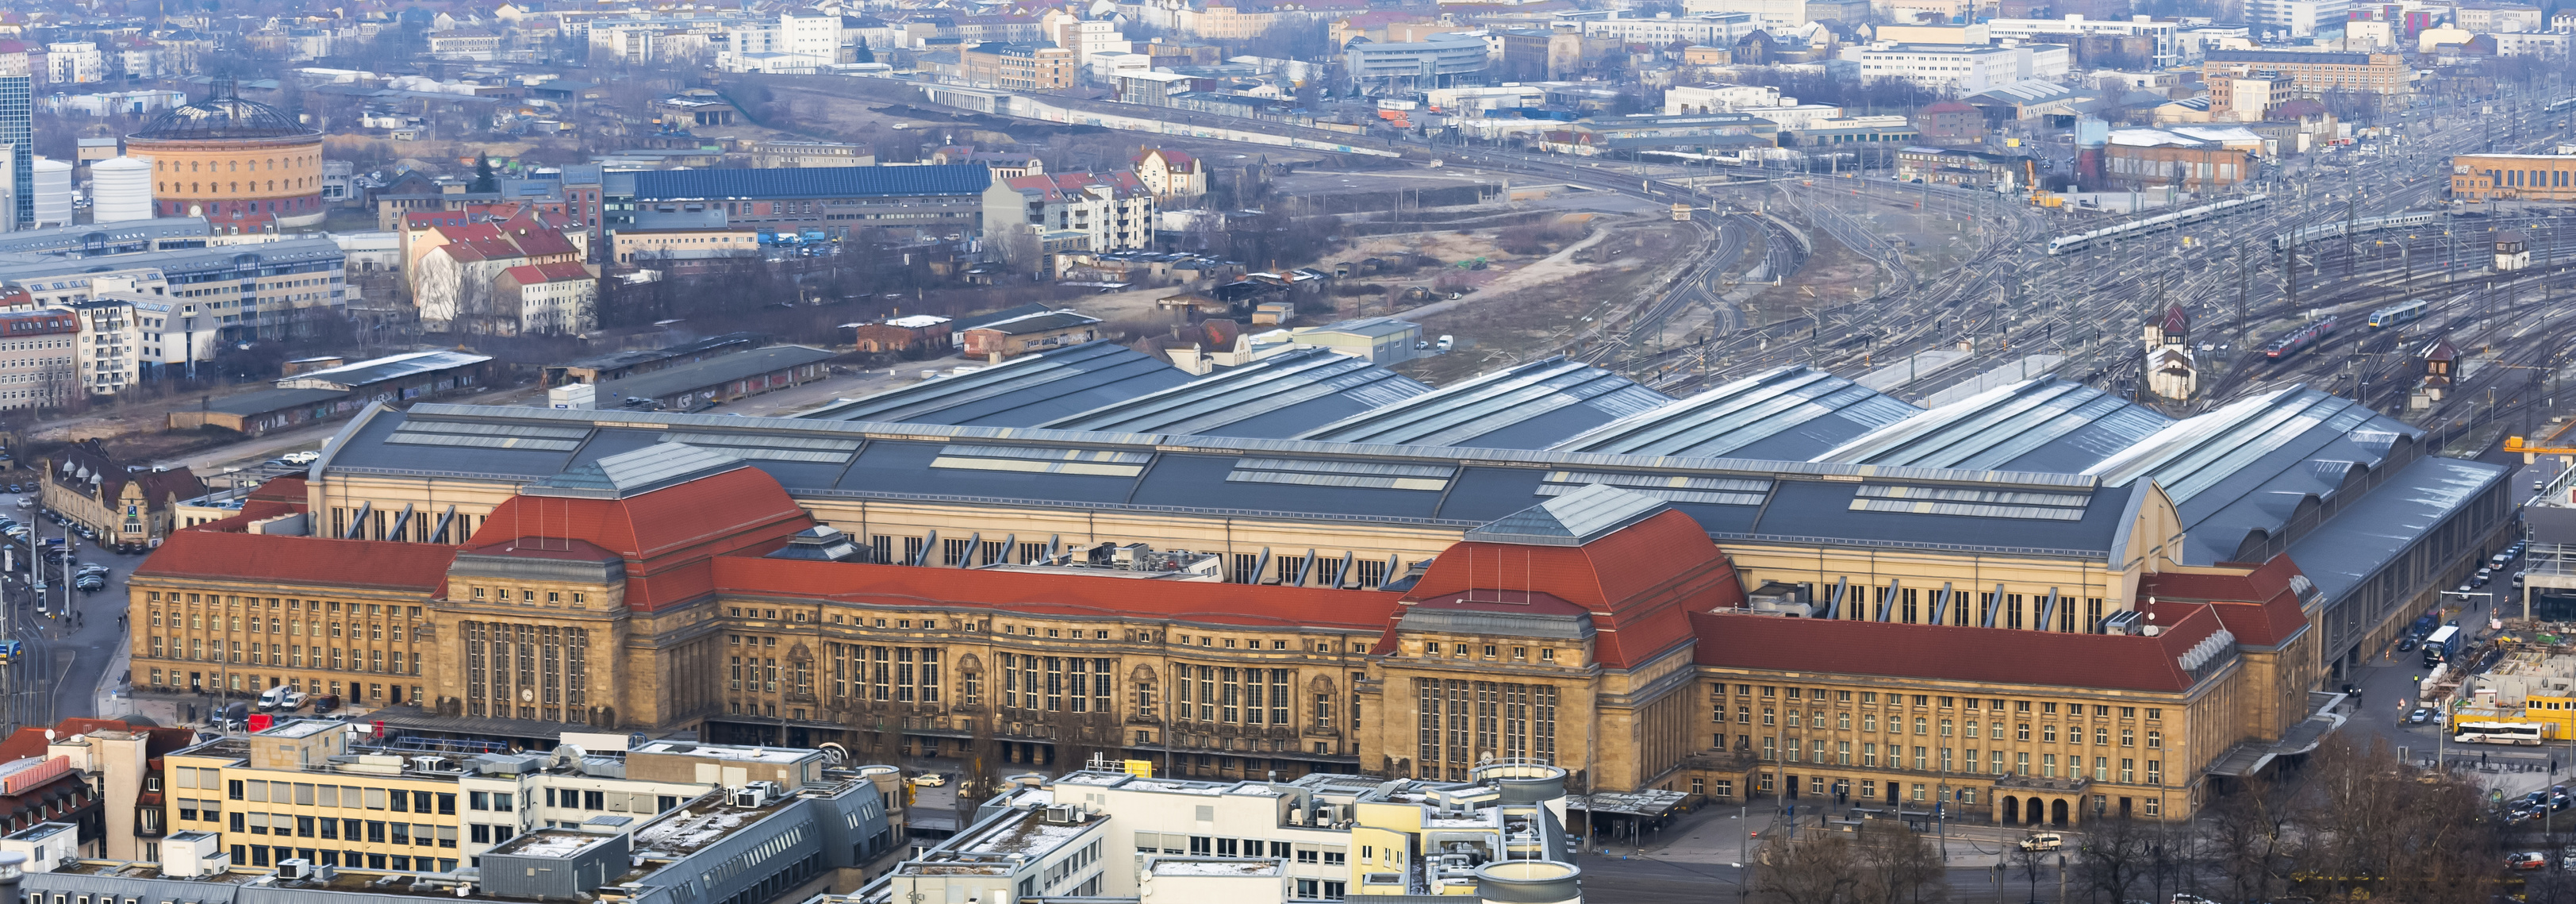 leipzig germany central train station from above